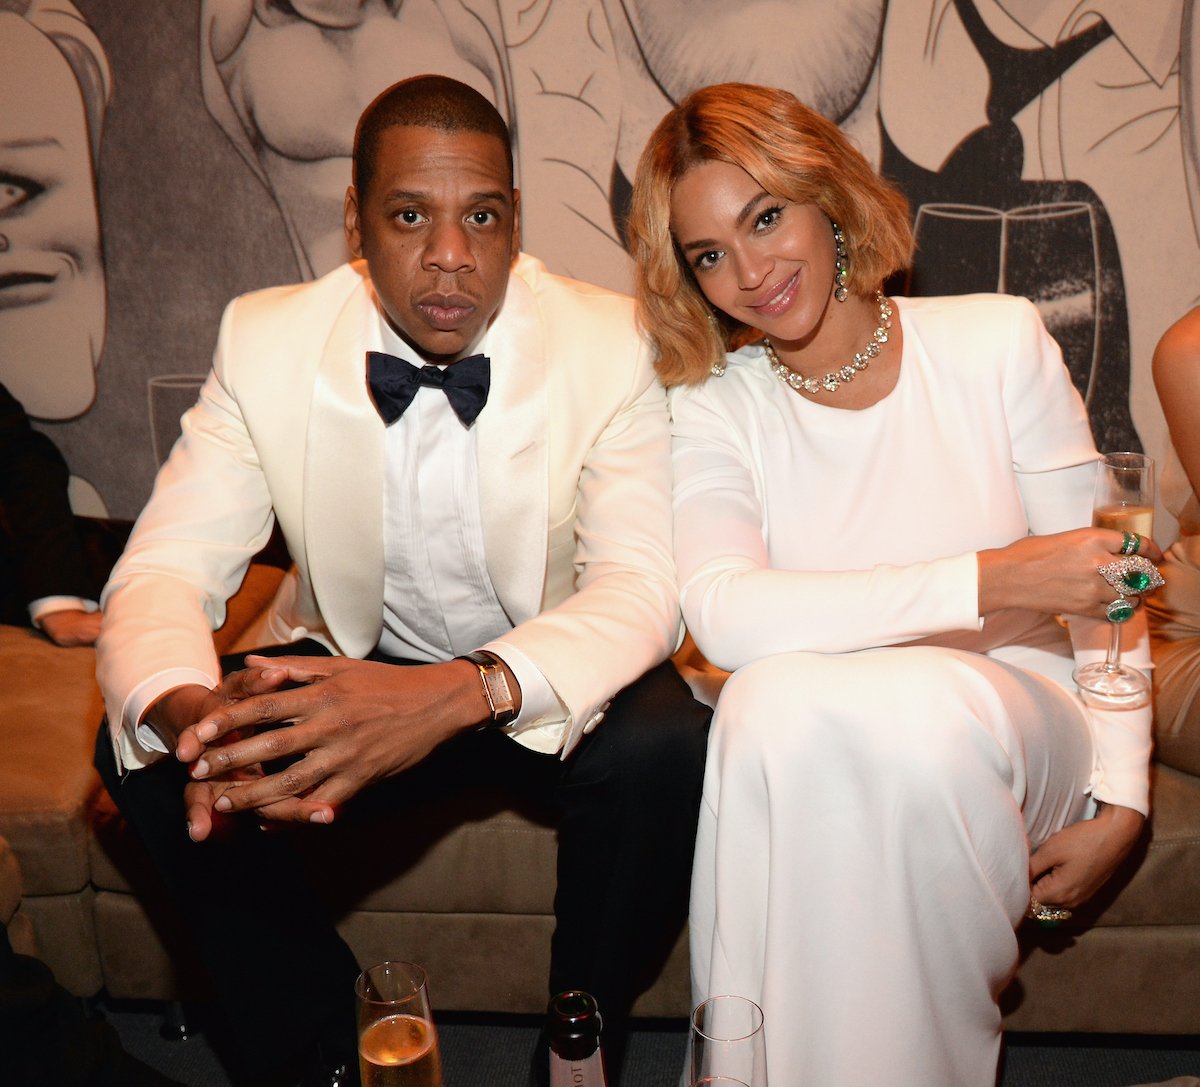 beyonce and jay z music video lourve